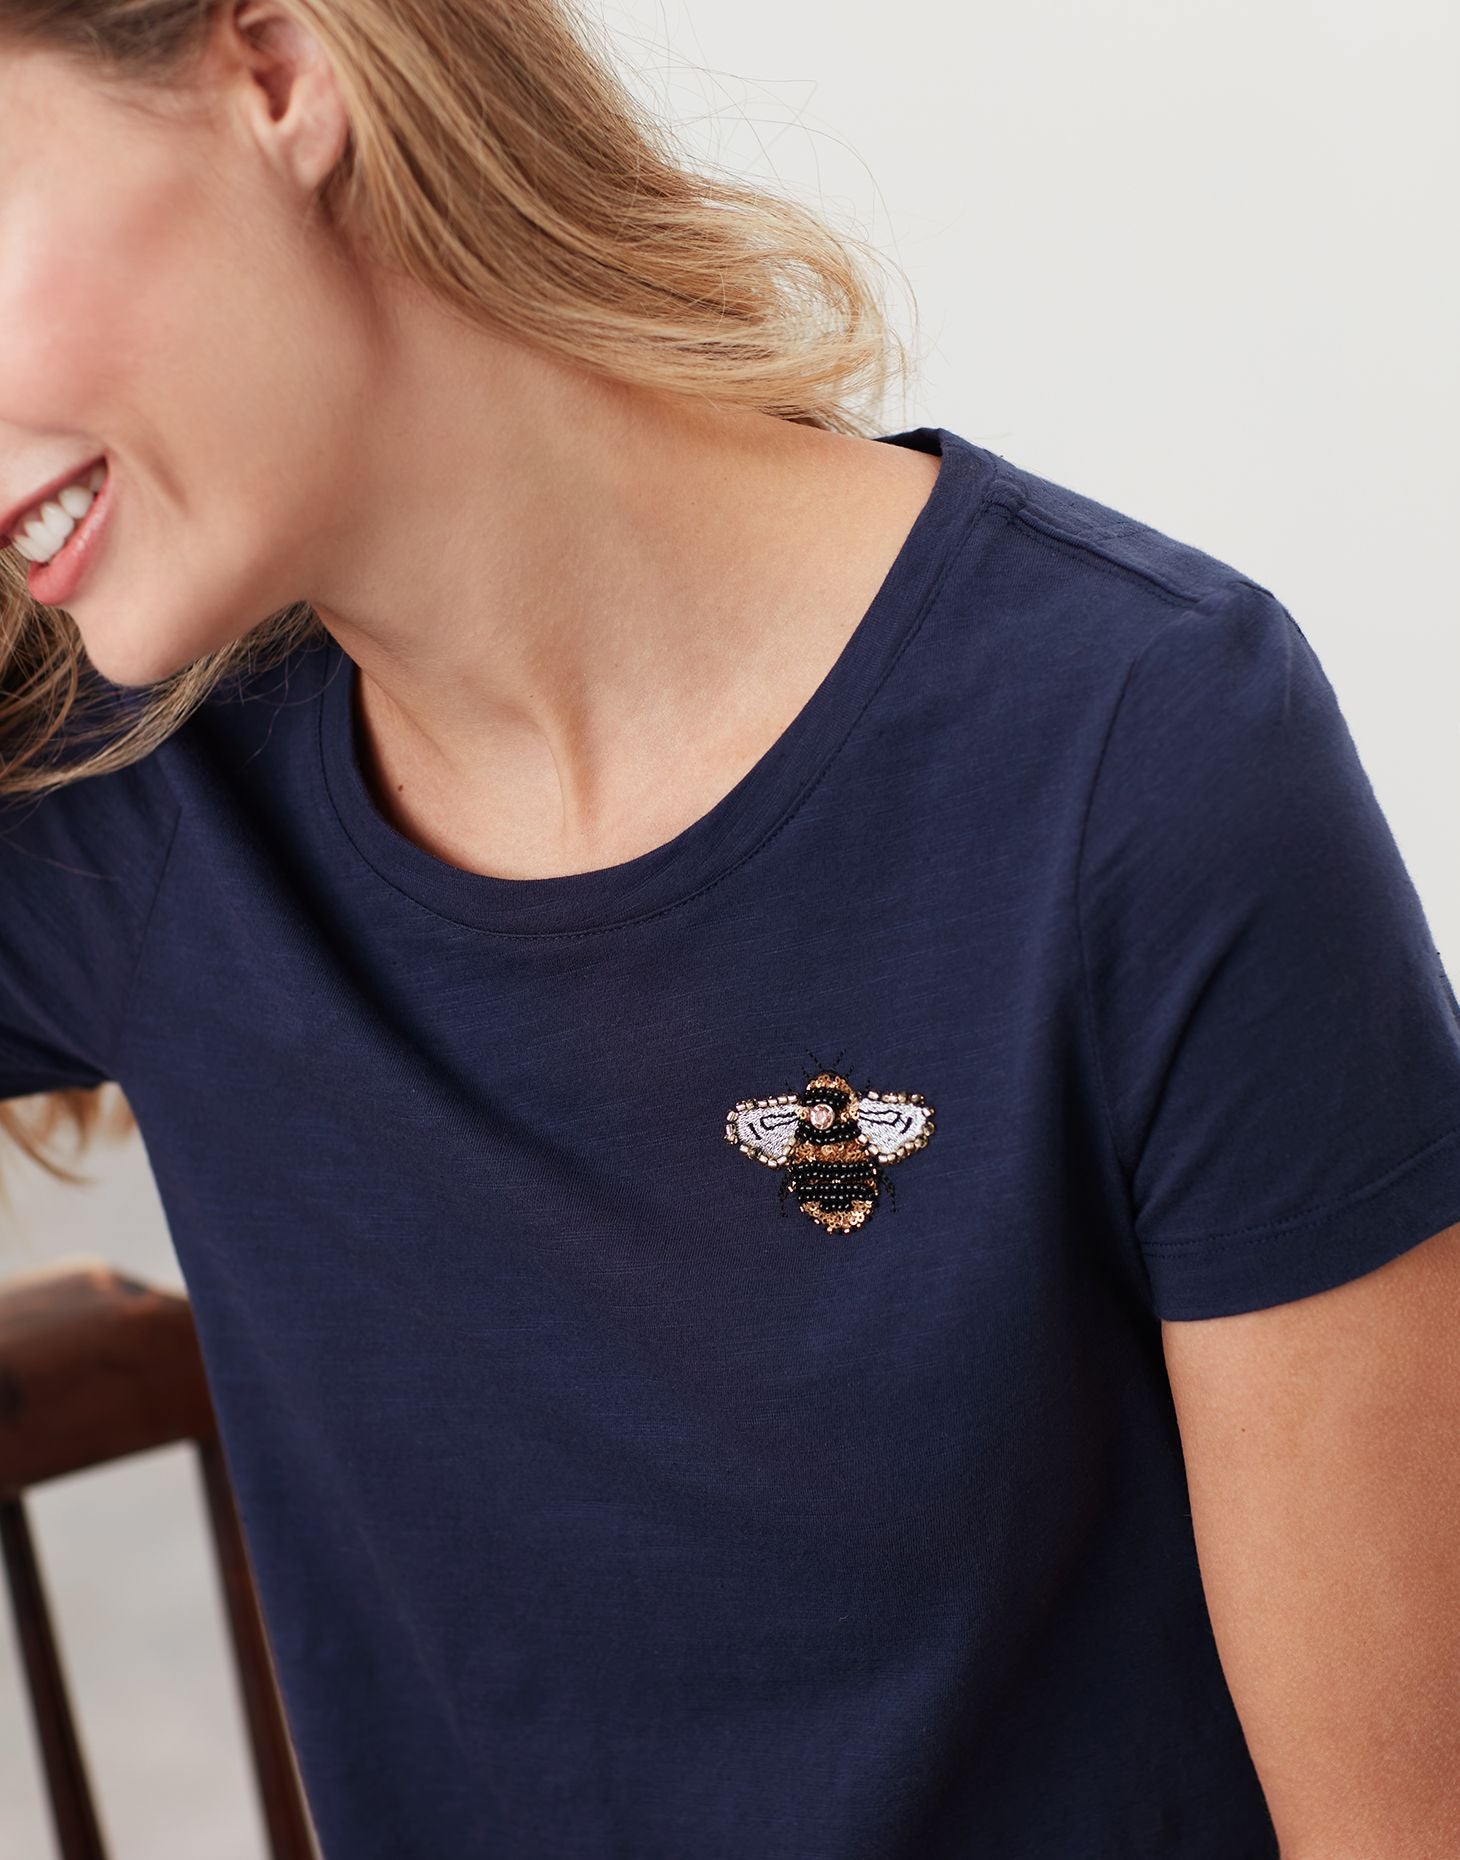 Joules - Women's Carley Embroidered Classic Crew T-Shirt - French Navy